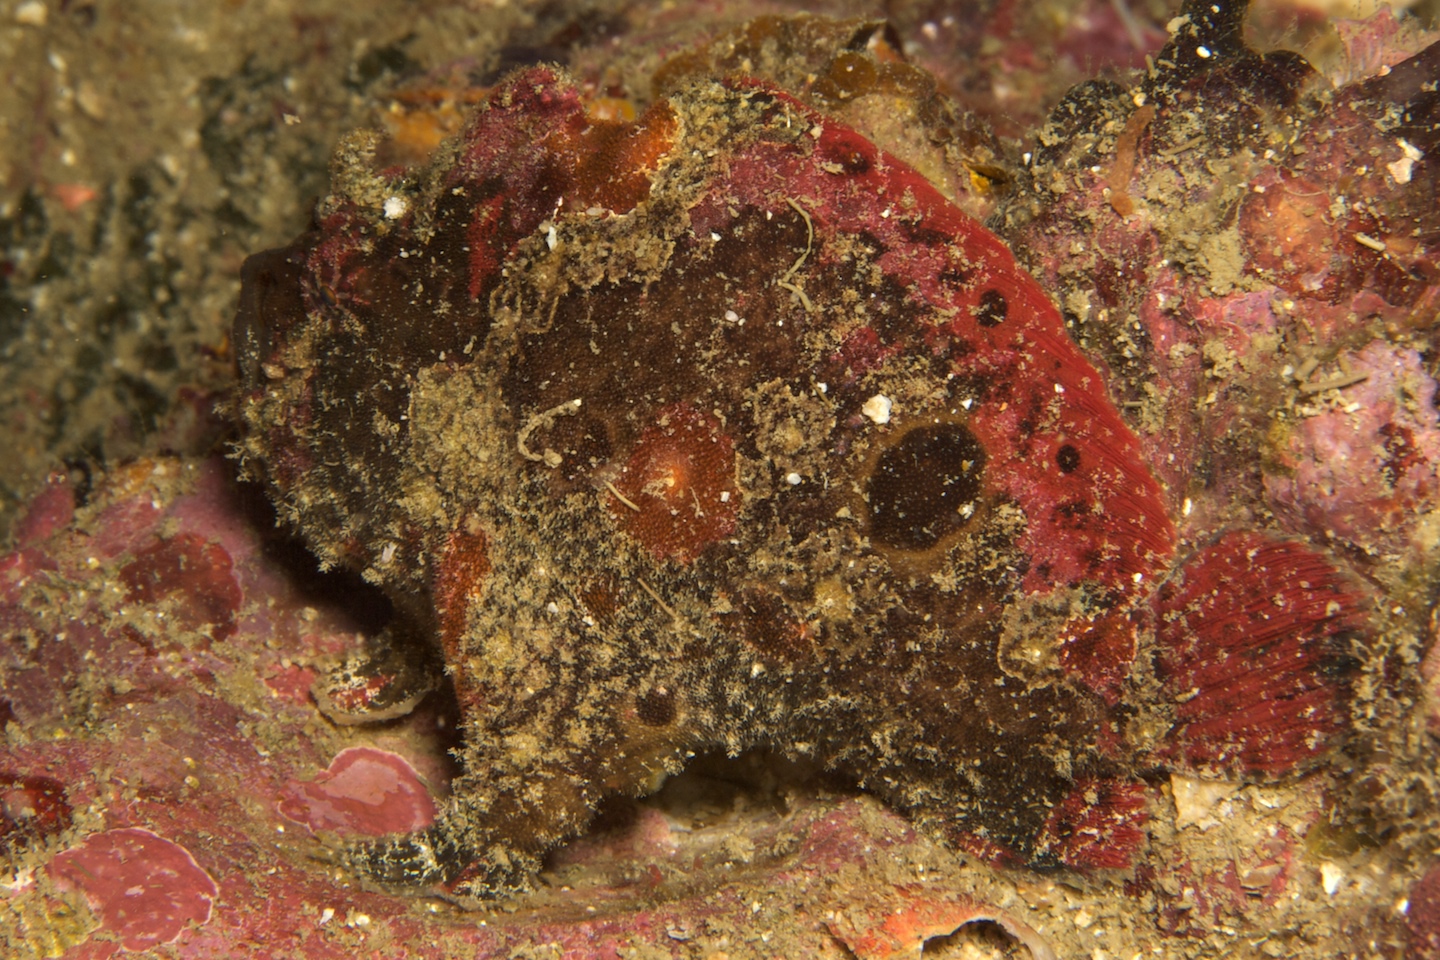 Freckled frogfish